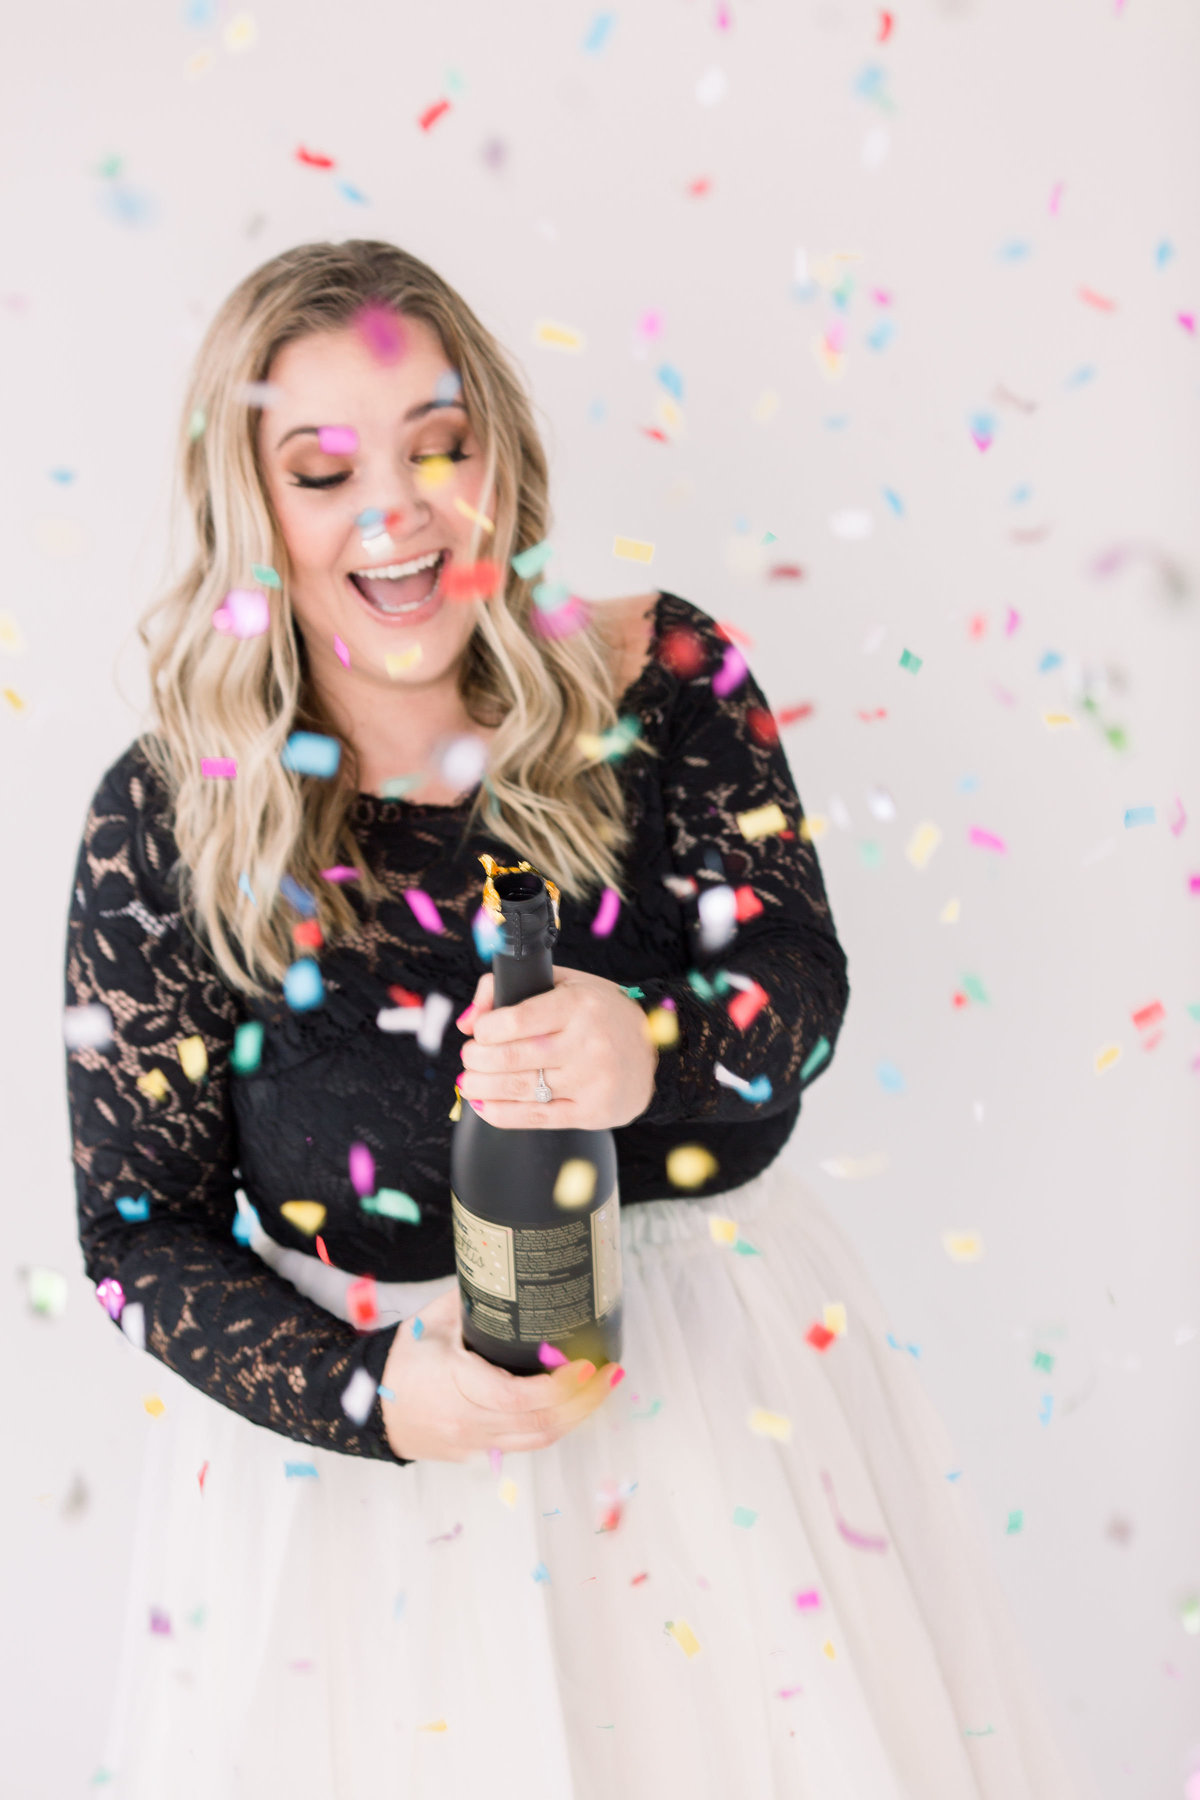 Woman popping bottle of champagne with confetti